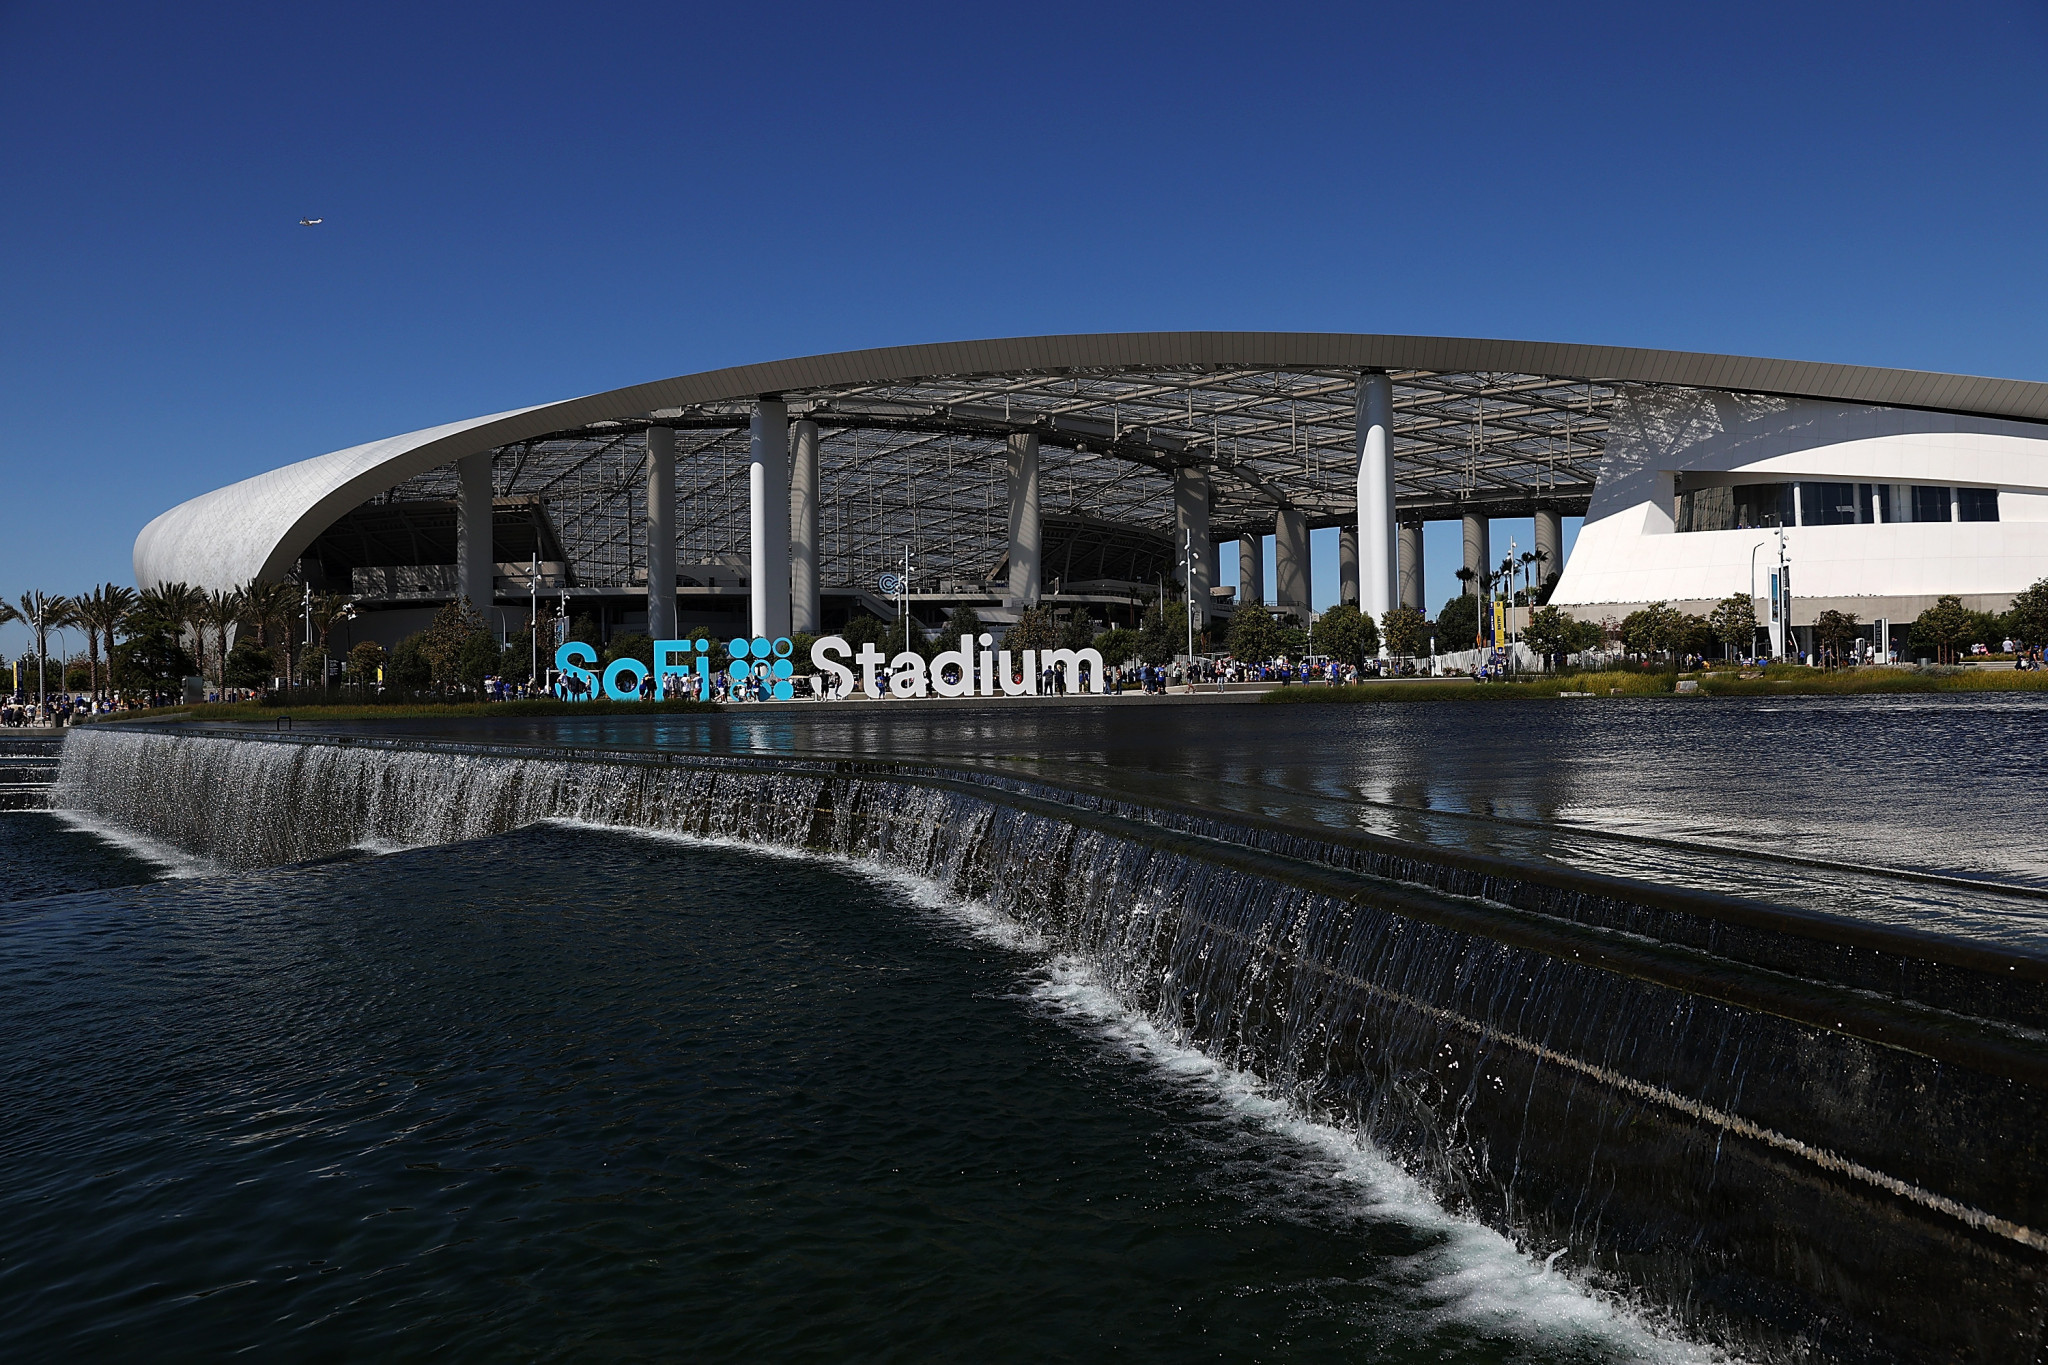 SoFi Stadium transport links receive further financial boost prior to Los Angeles 2028